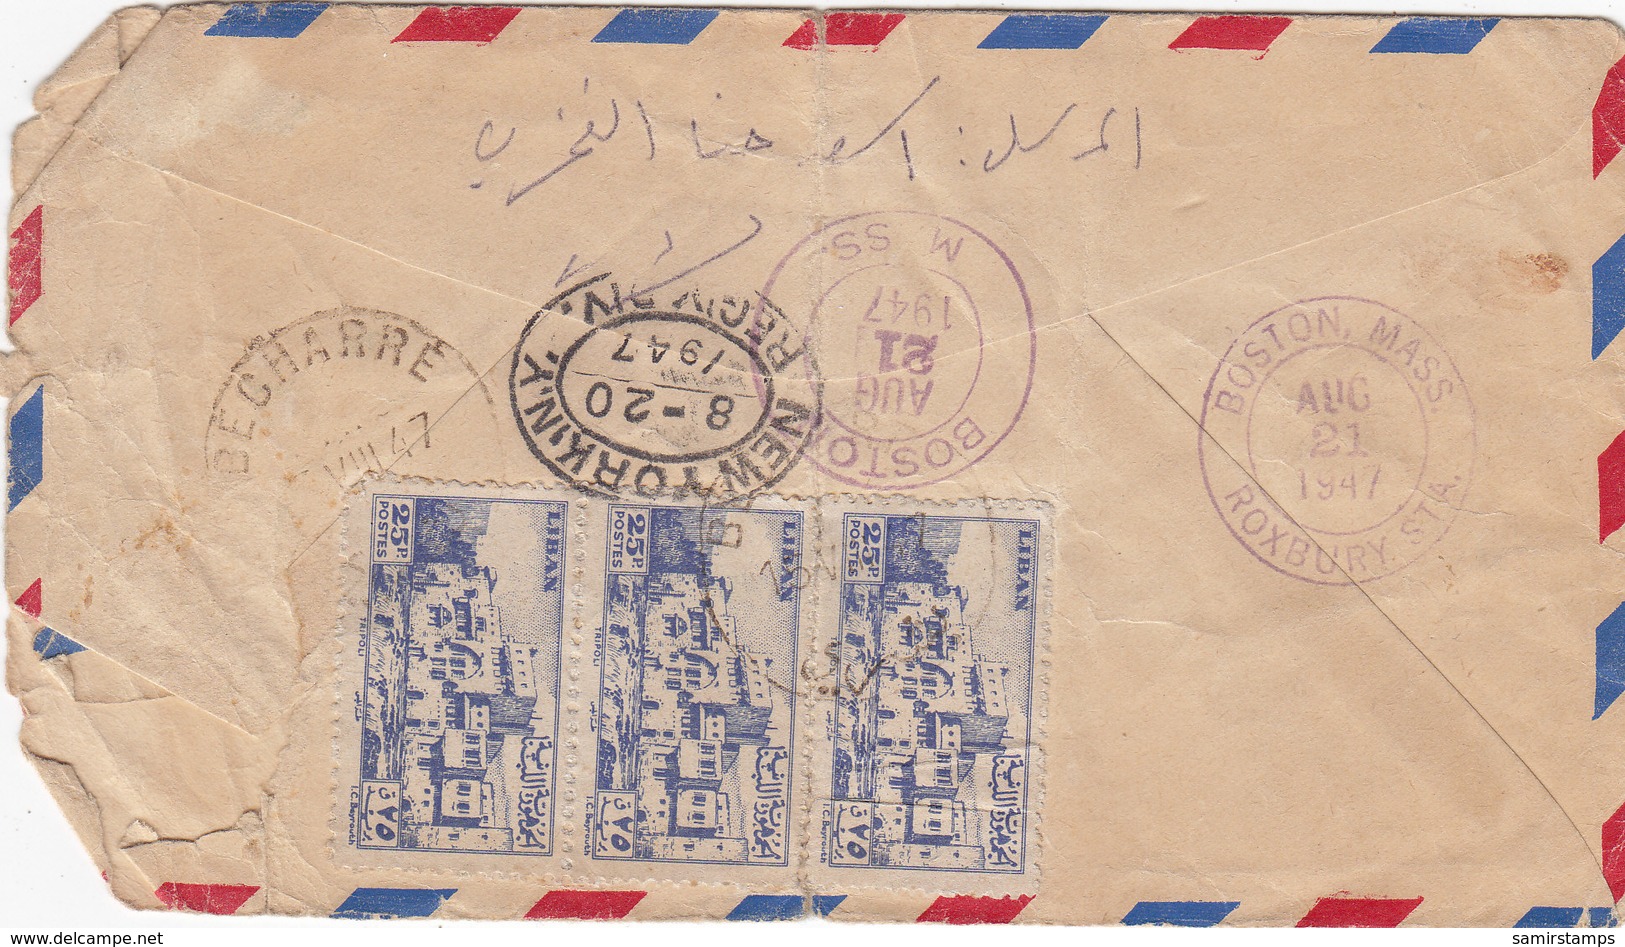 Lebanon-Liban Registr.com.cover BECHARE Clear Cancel- To USA- 2nd Scan- Red. Pricer - SKRILL PAY ONLY - Lebanon